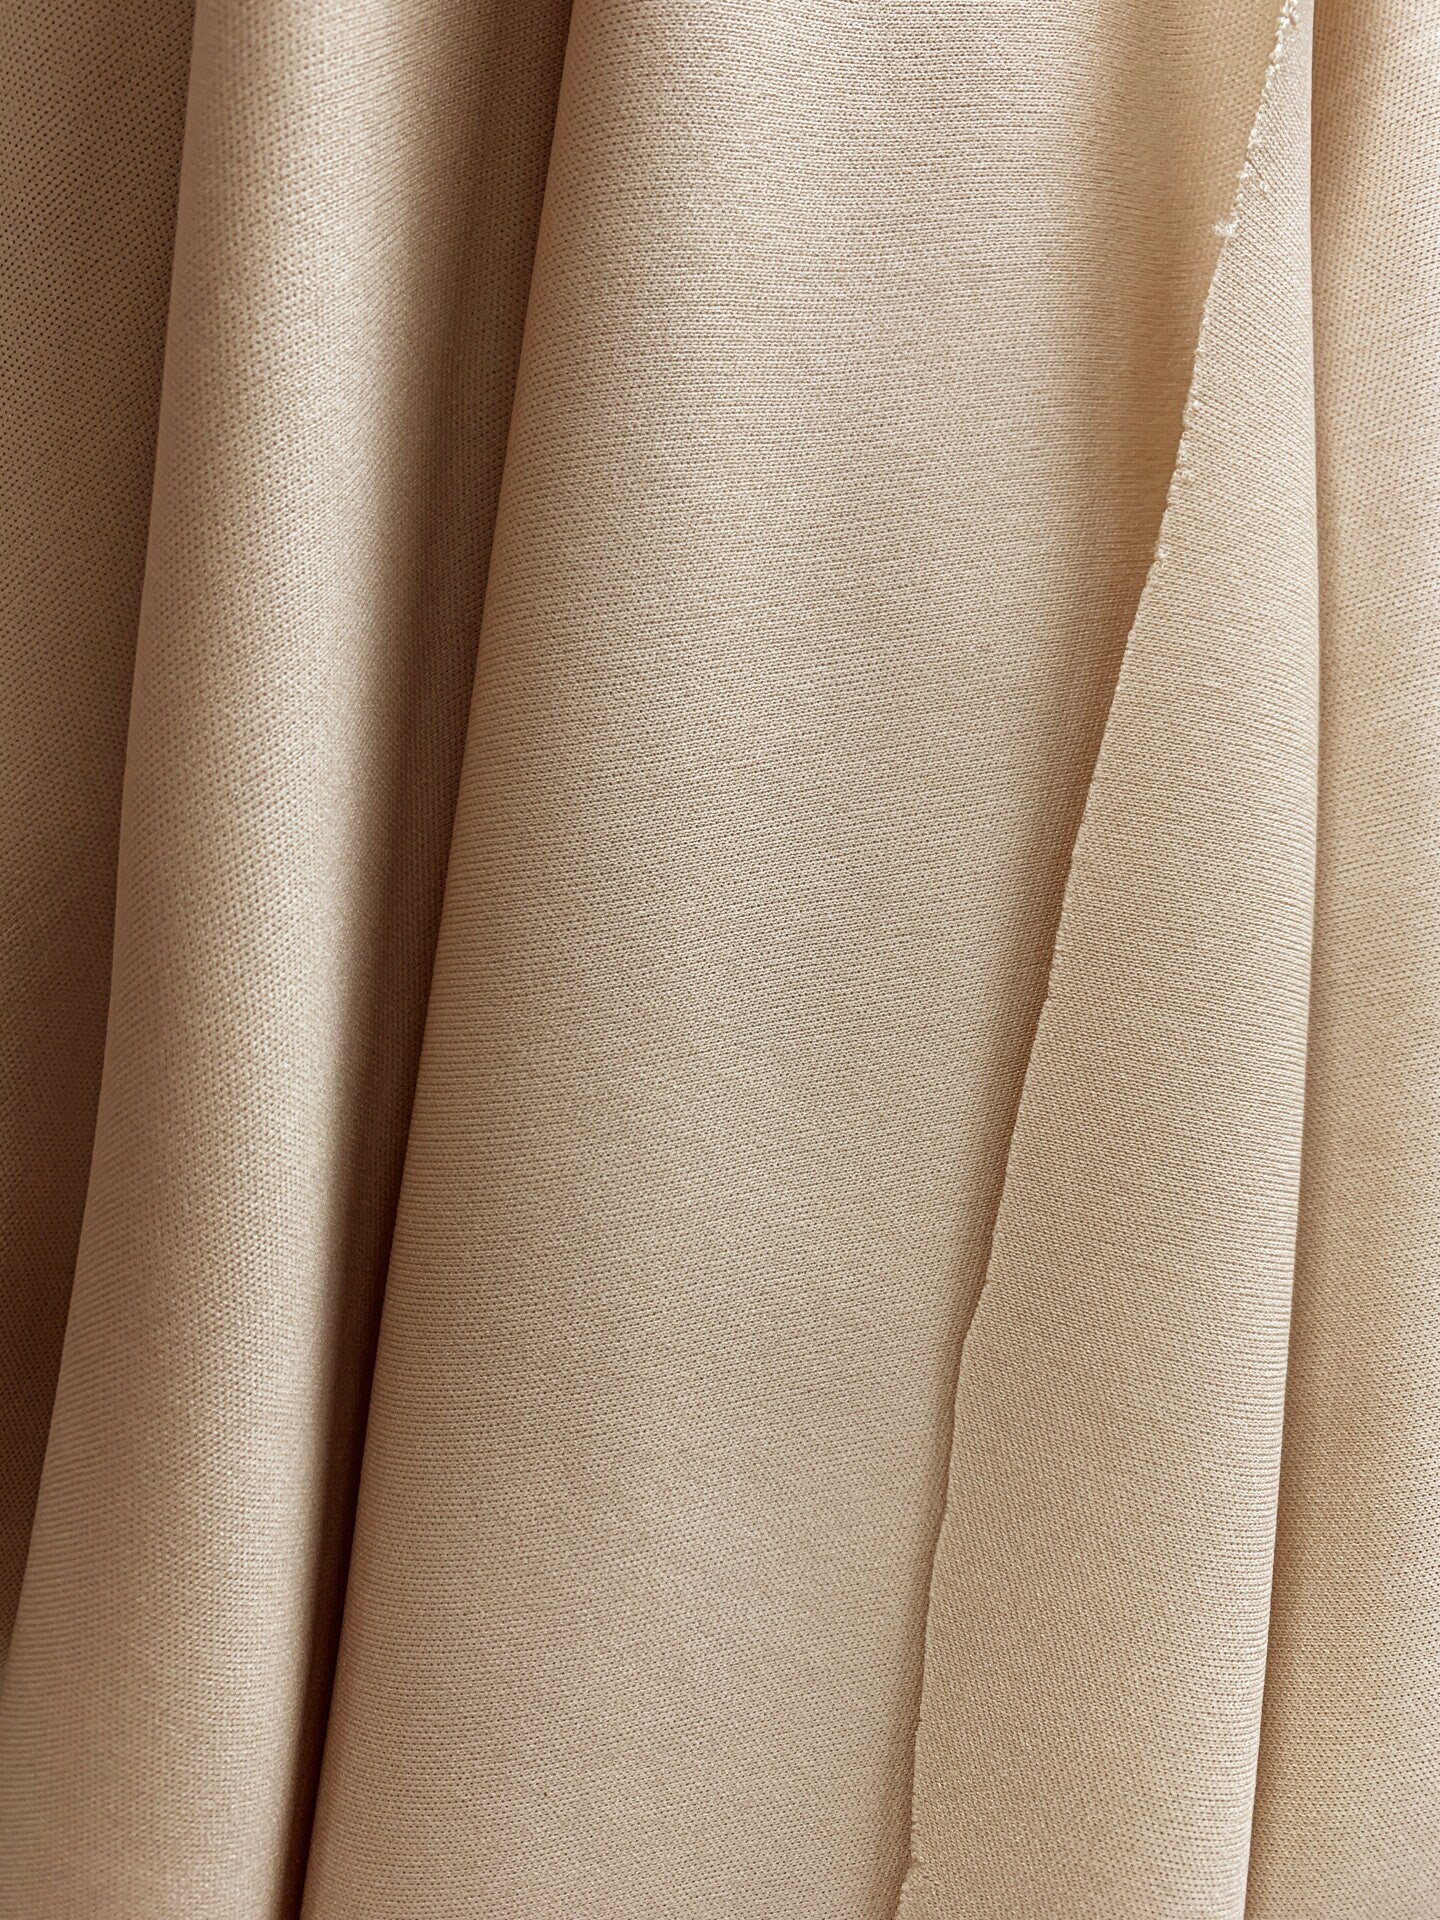 NUDE Stretch Lining Fabric (60 in.) Sold By The Yard